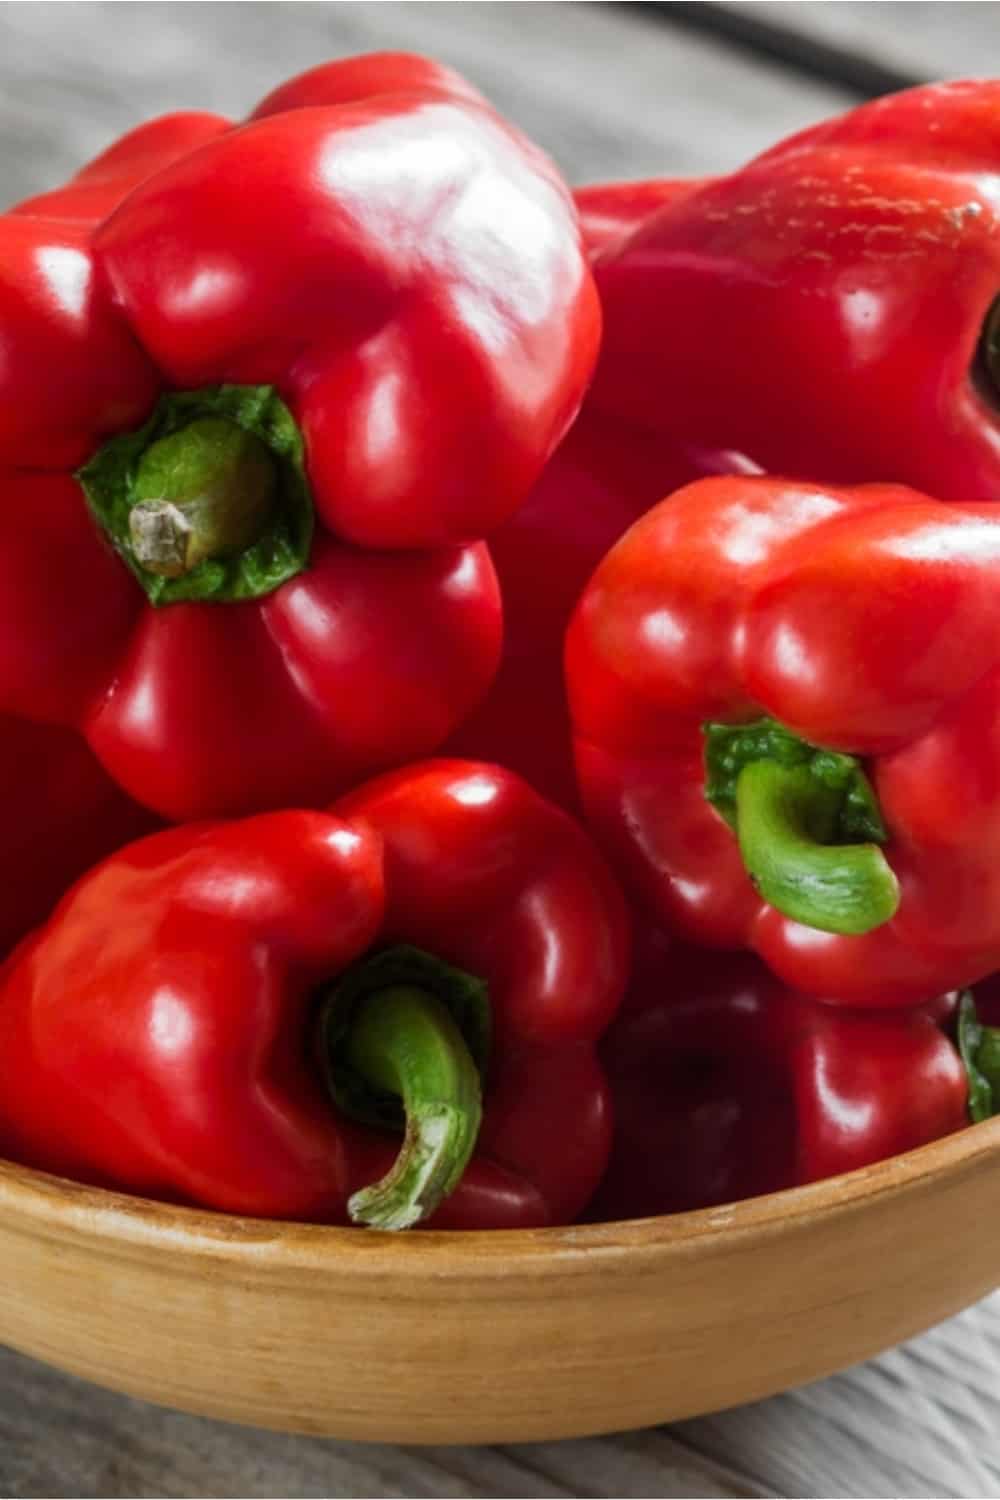 red peppers in a wooden bowl